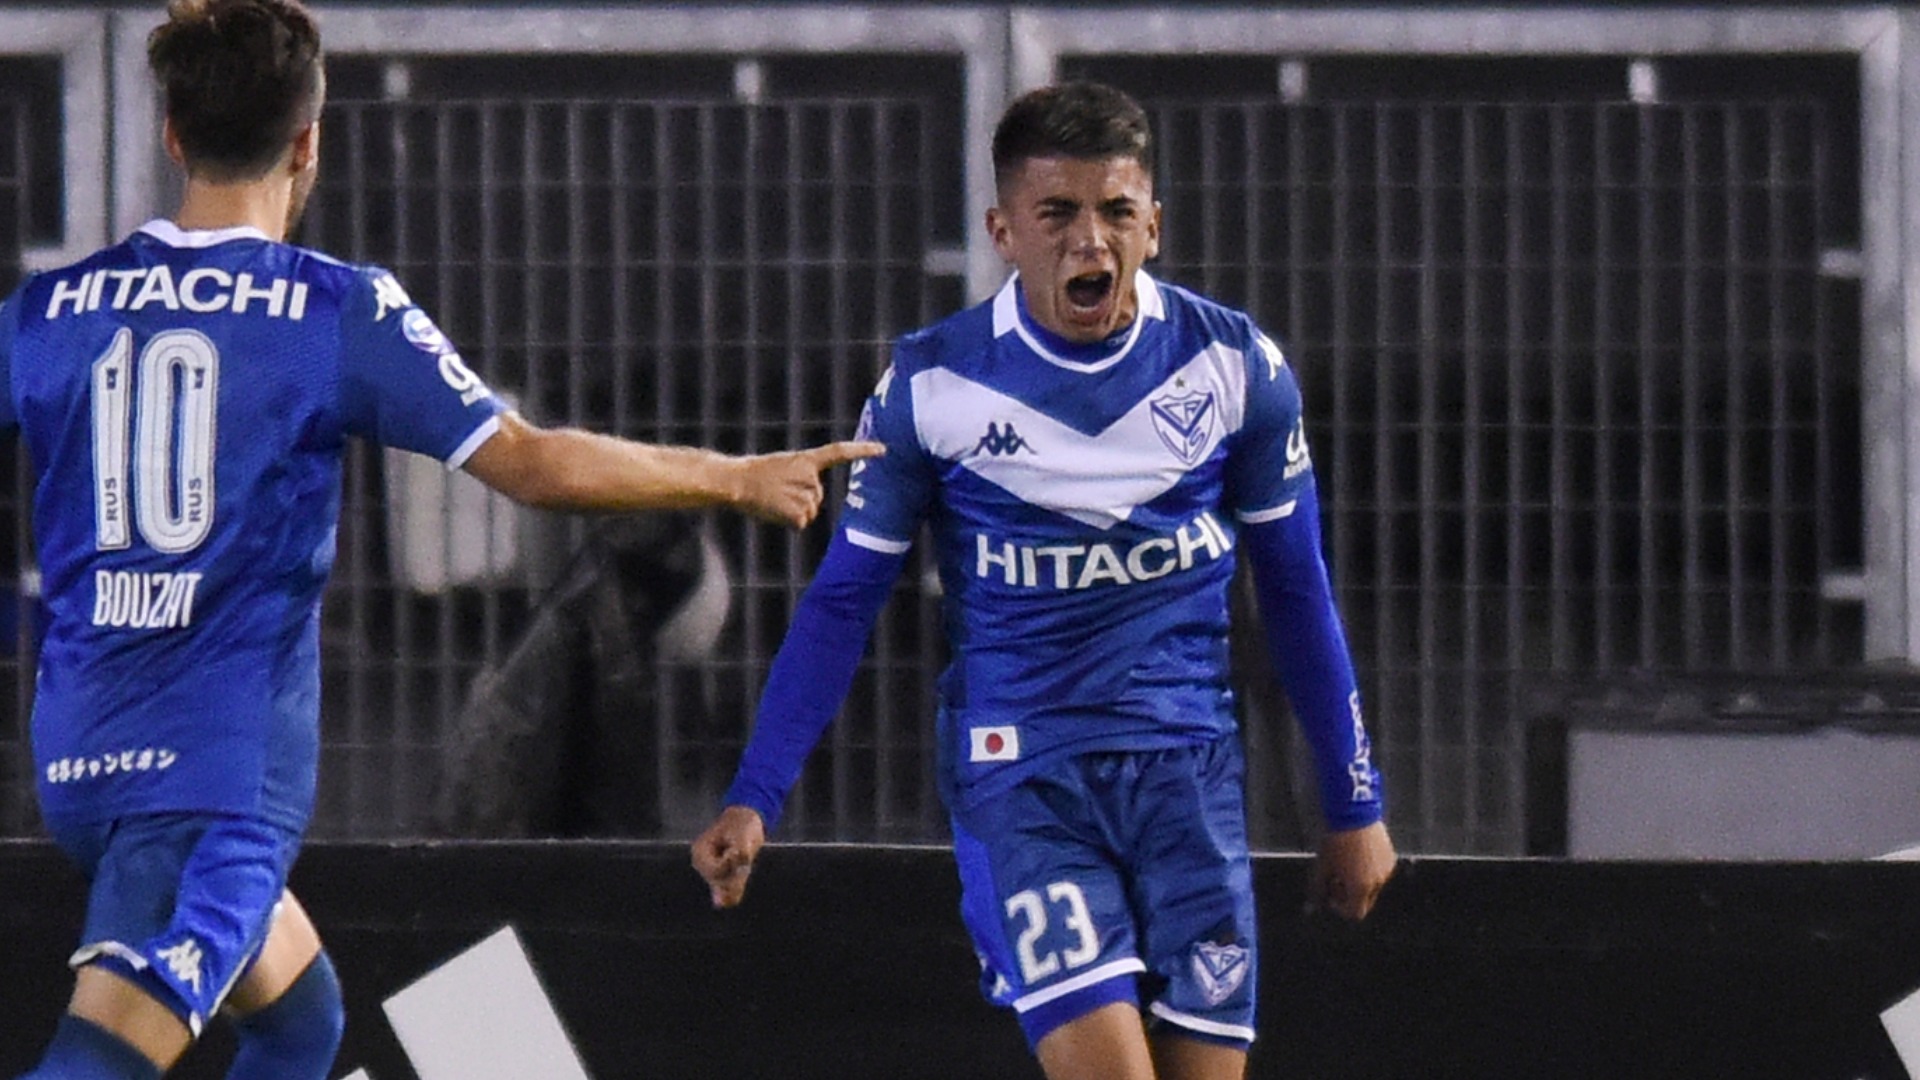 Carlos Tevez blazed a trail out of Fuerte Apache for Thiago Almada, but the teenager could one day be held in even higher regard.